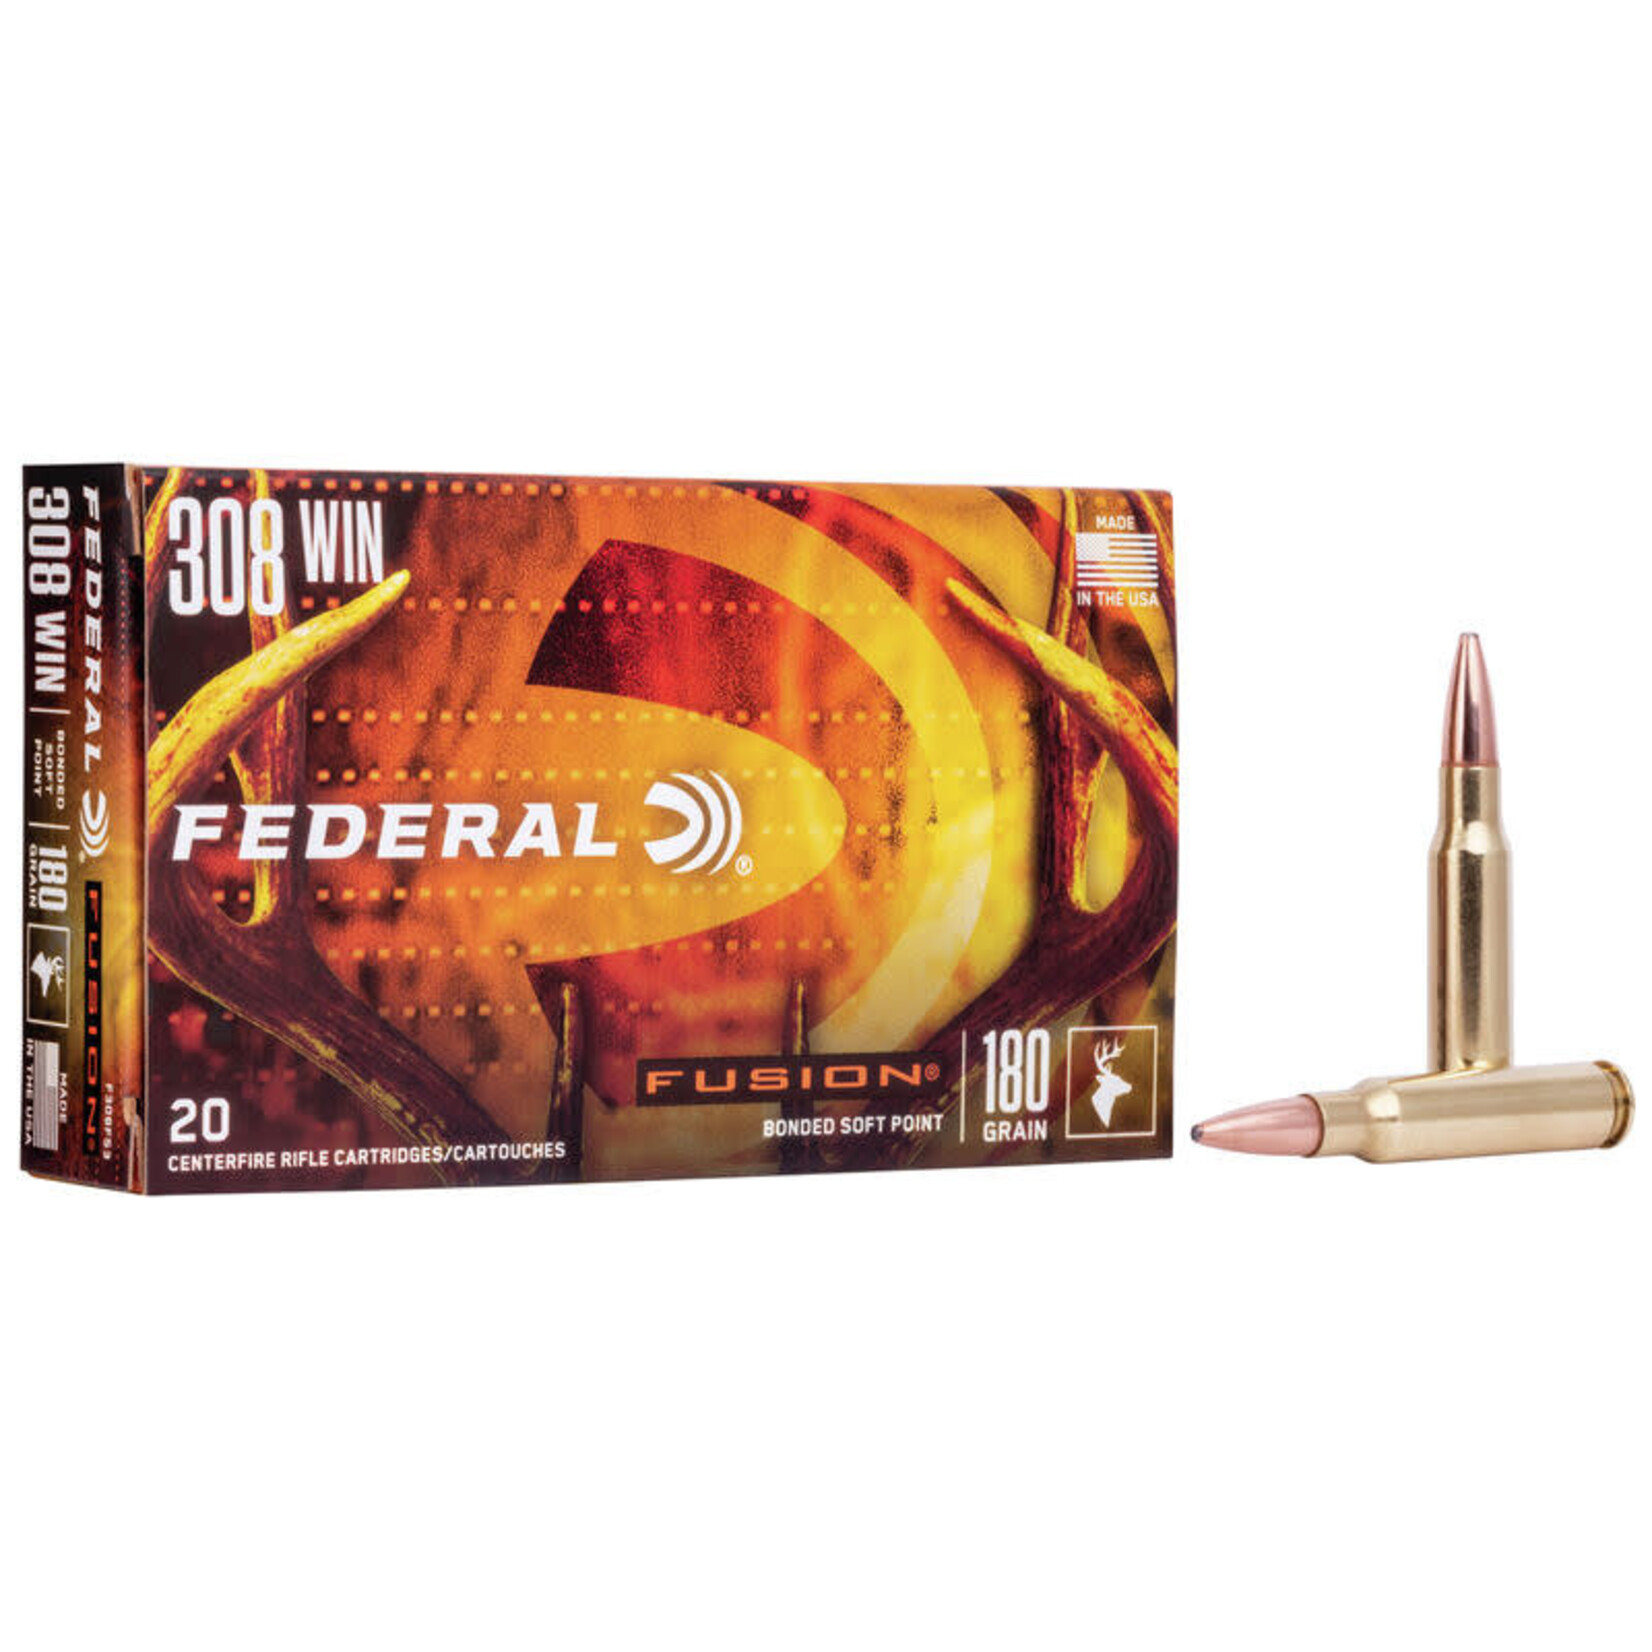 FEDERAL Munitions Federal Fusion Cal.308Win 180Gr